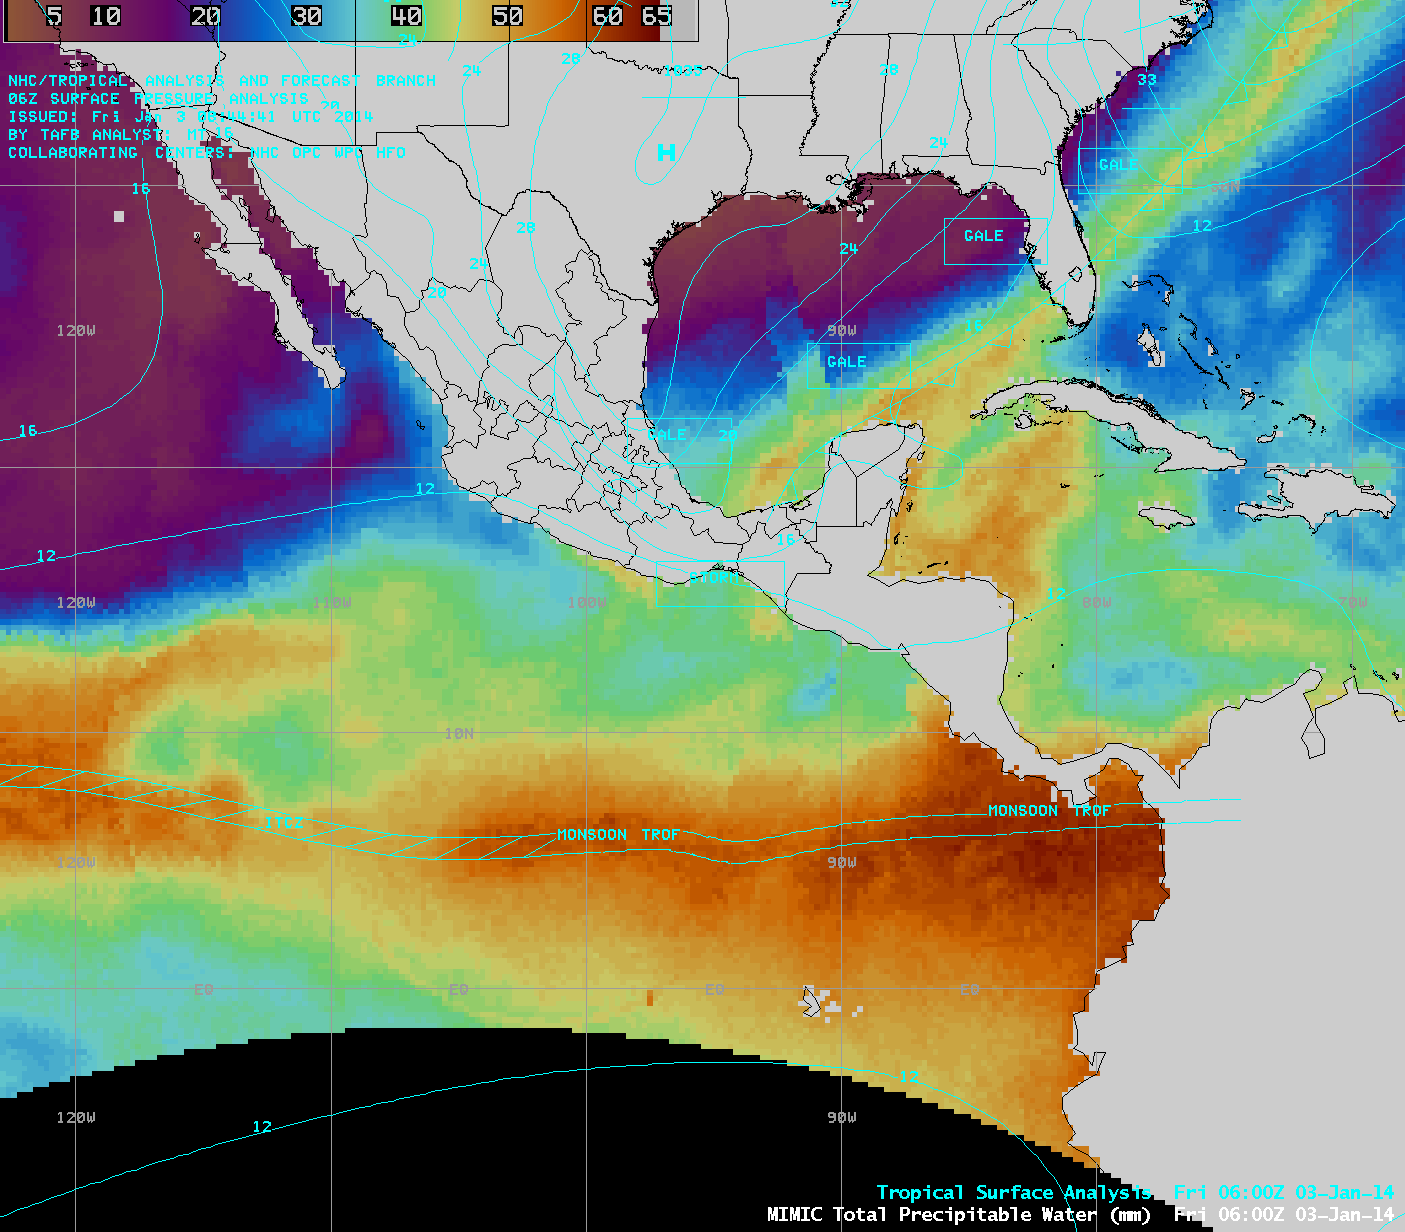 MIMIC Total Precipitable Water product, with tropical surface analyses